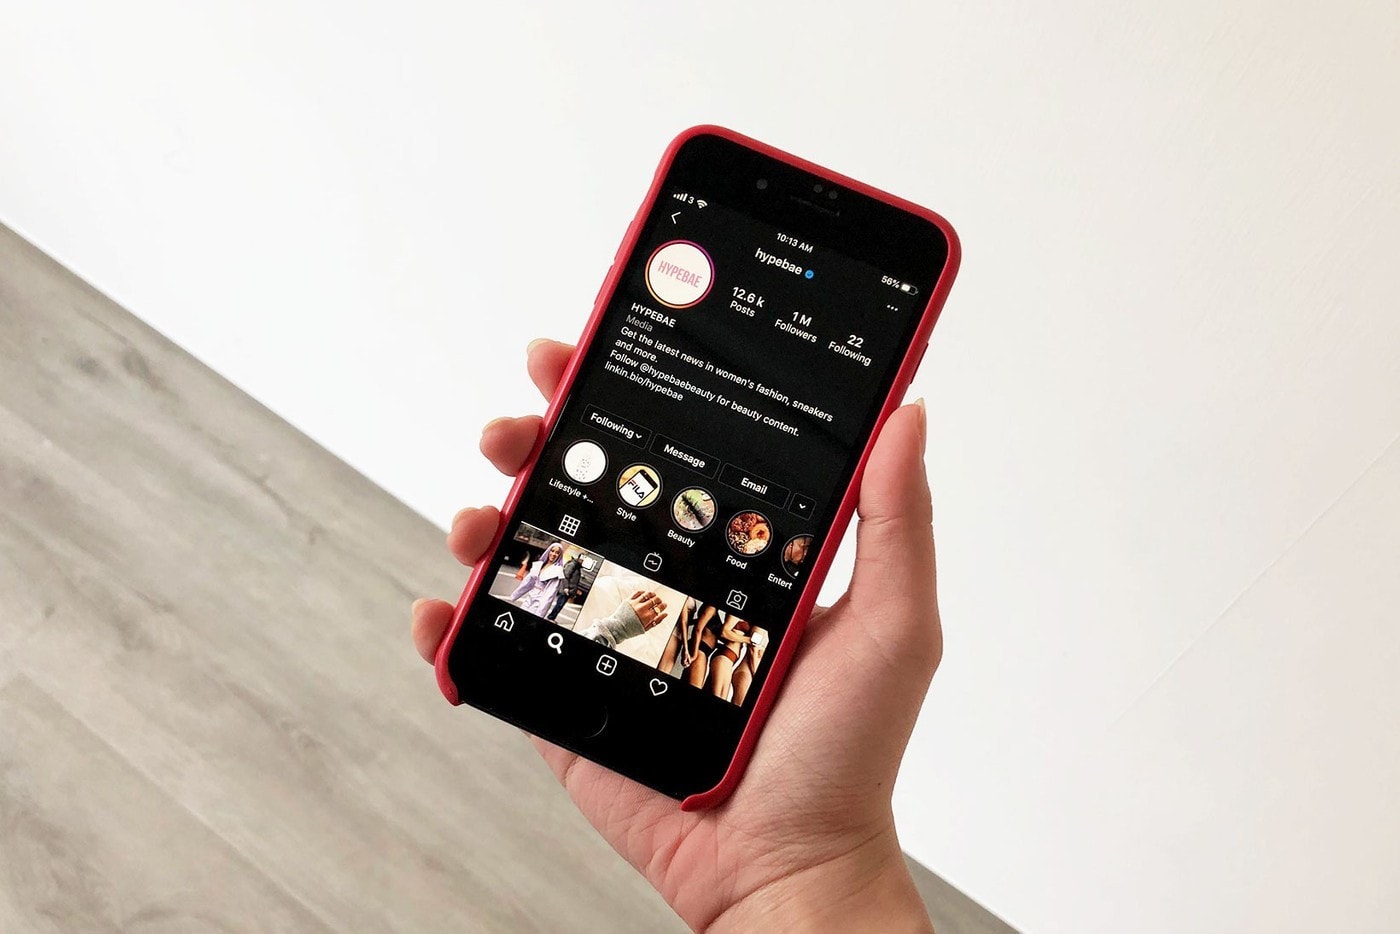 Instagram Bringing Back Chronological Feed Option 2022 Announcement